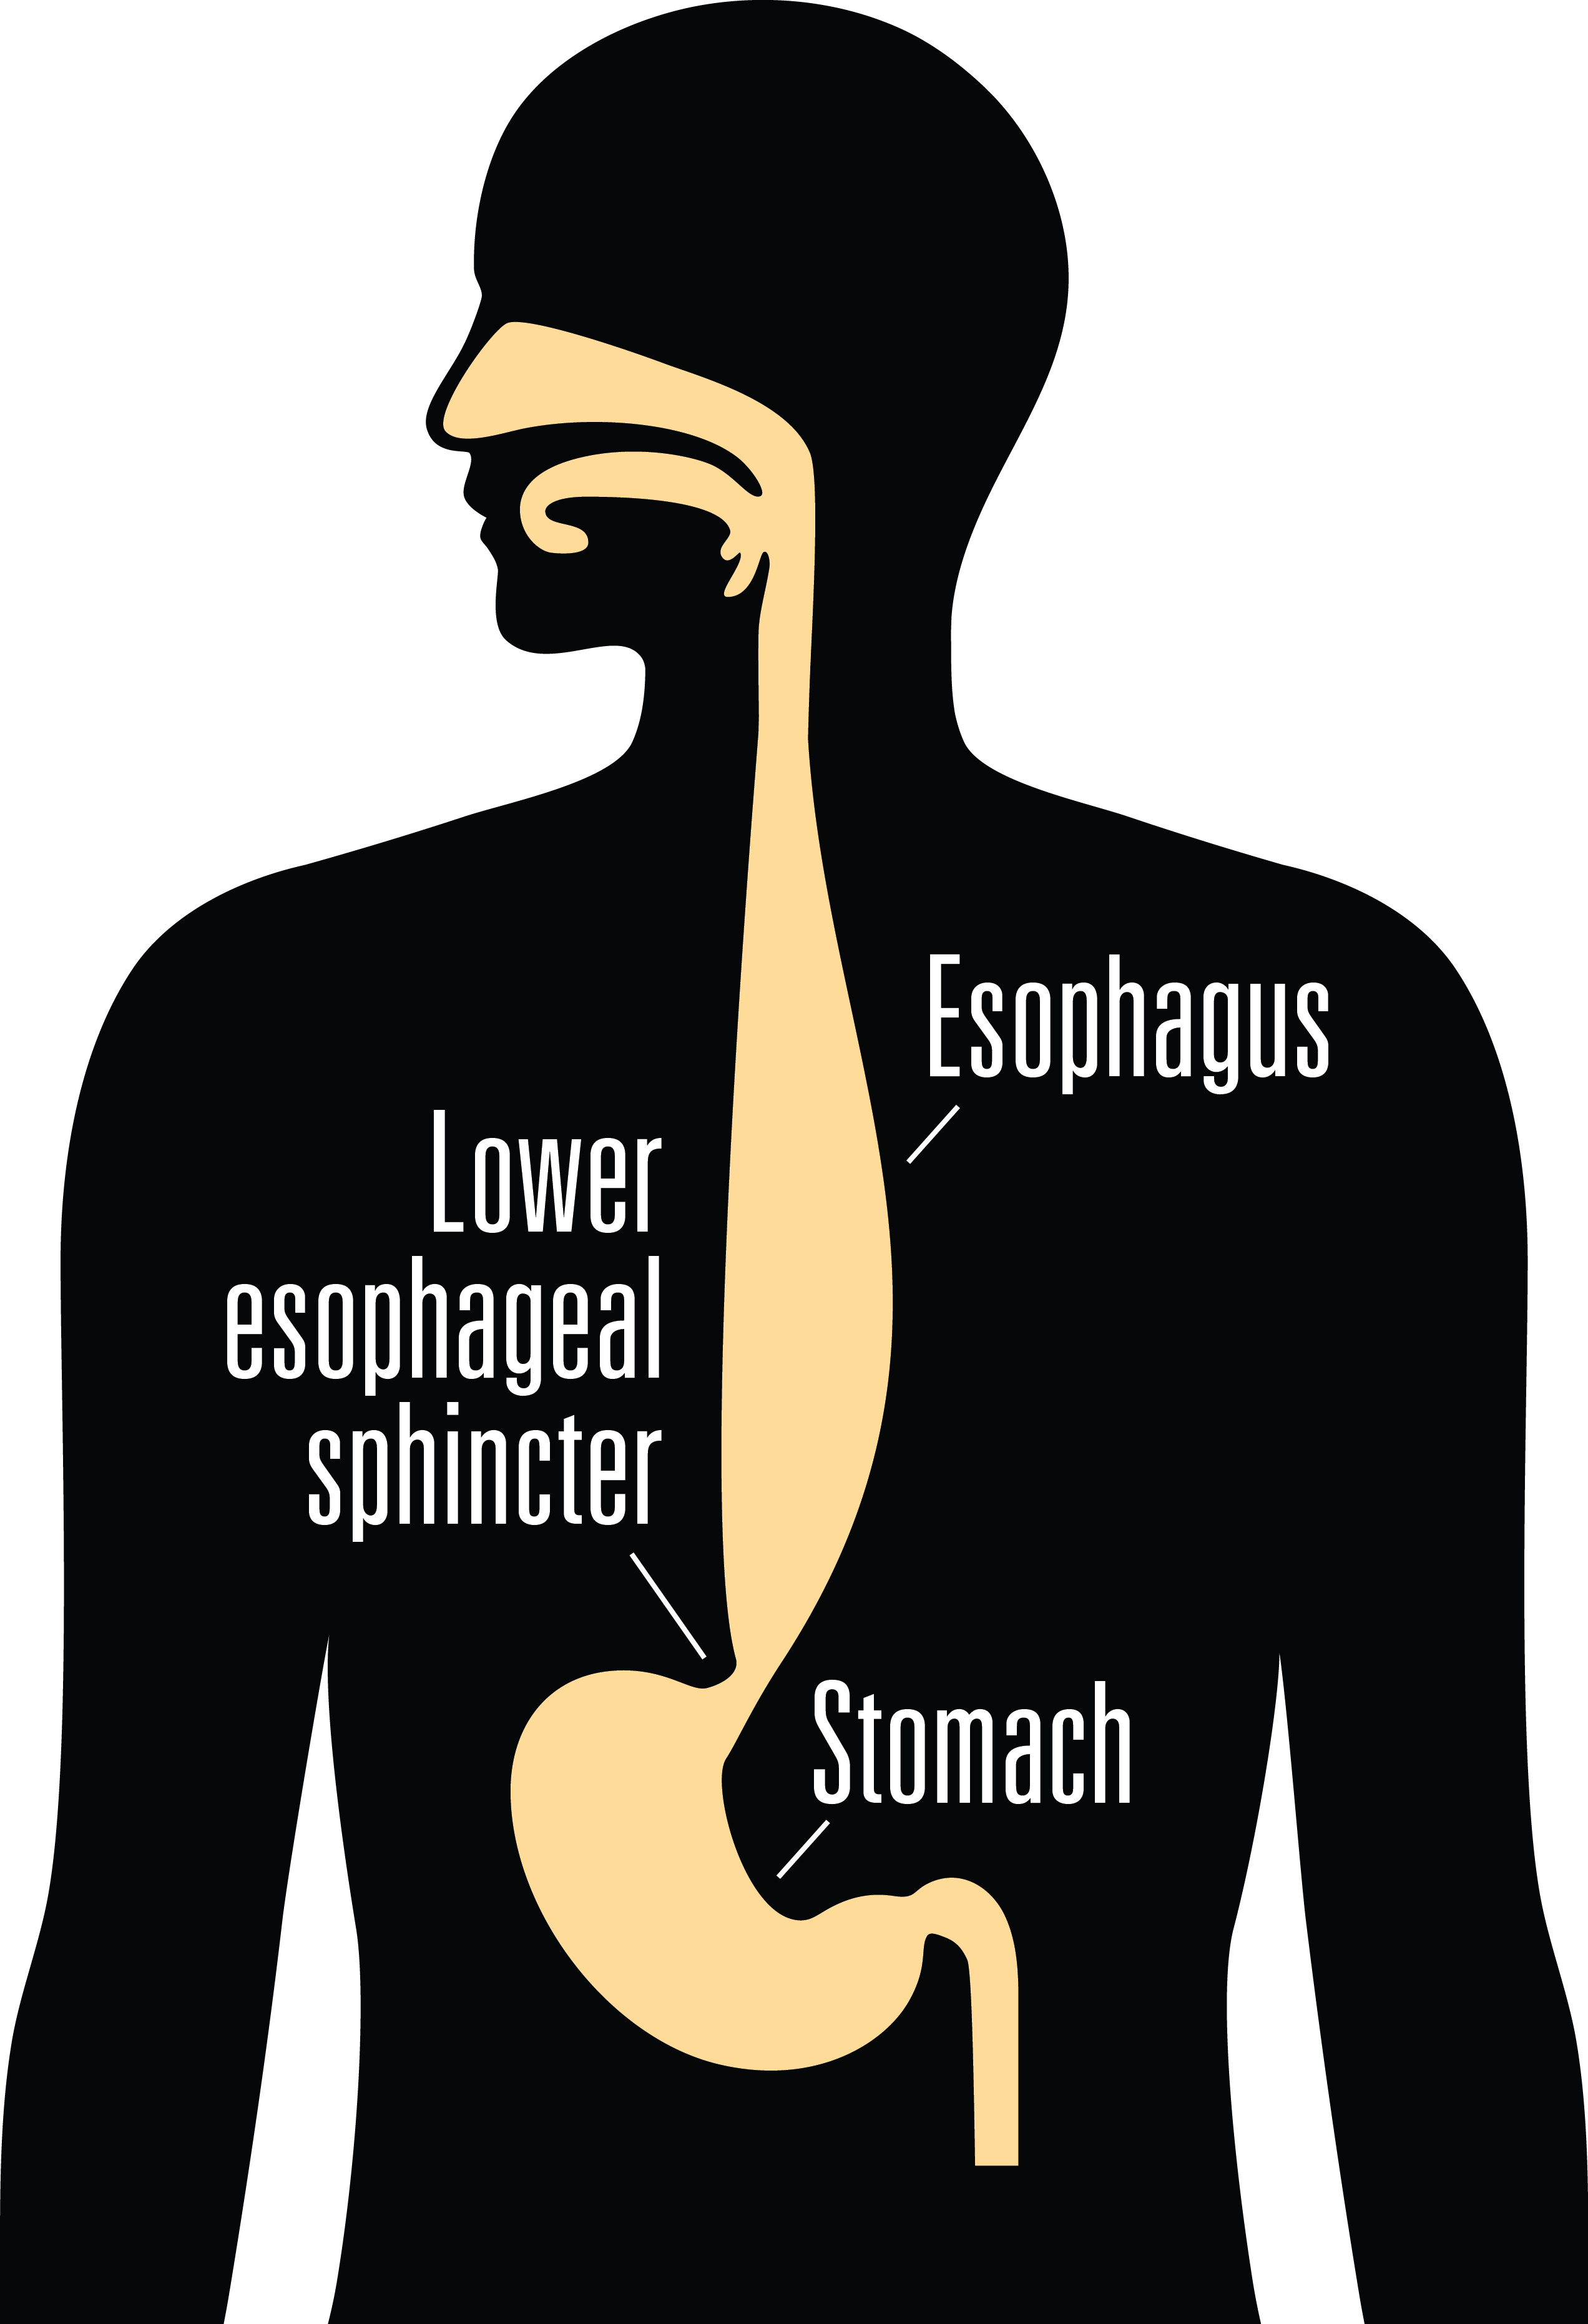 Graphic showing the esophagus, lower esophageal sphincter, and the stomach